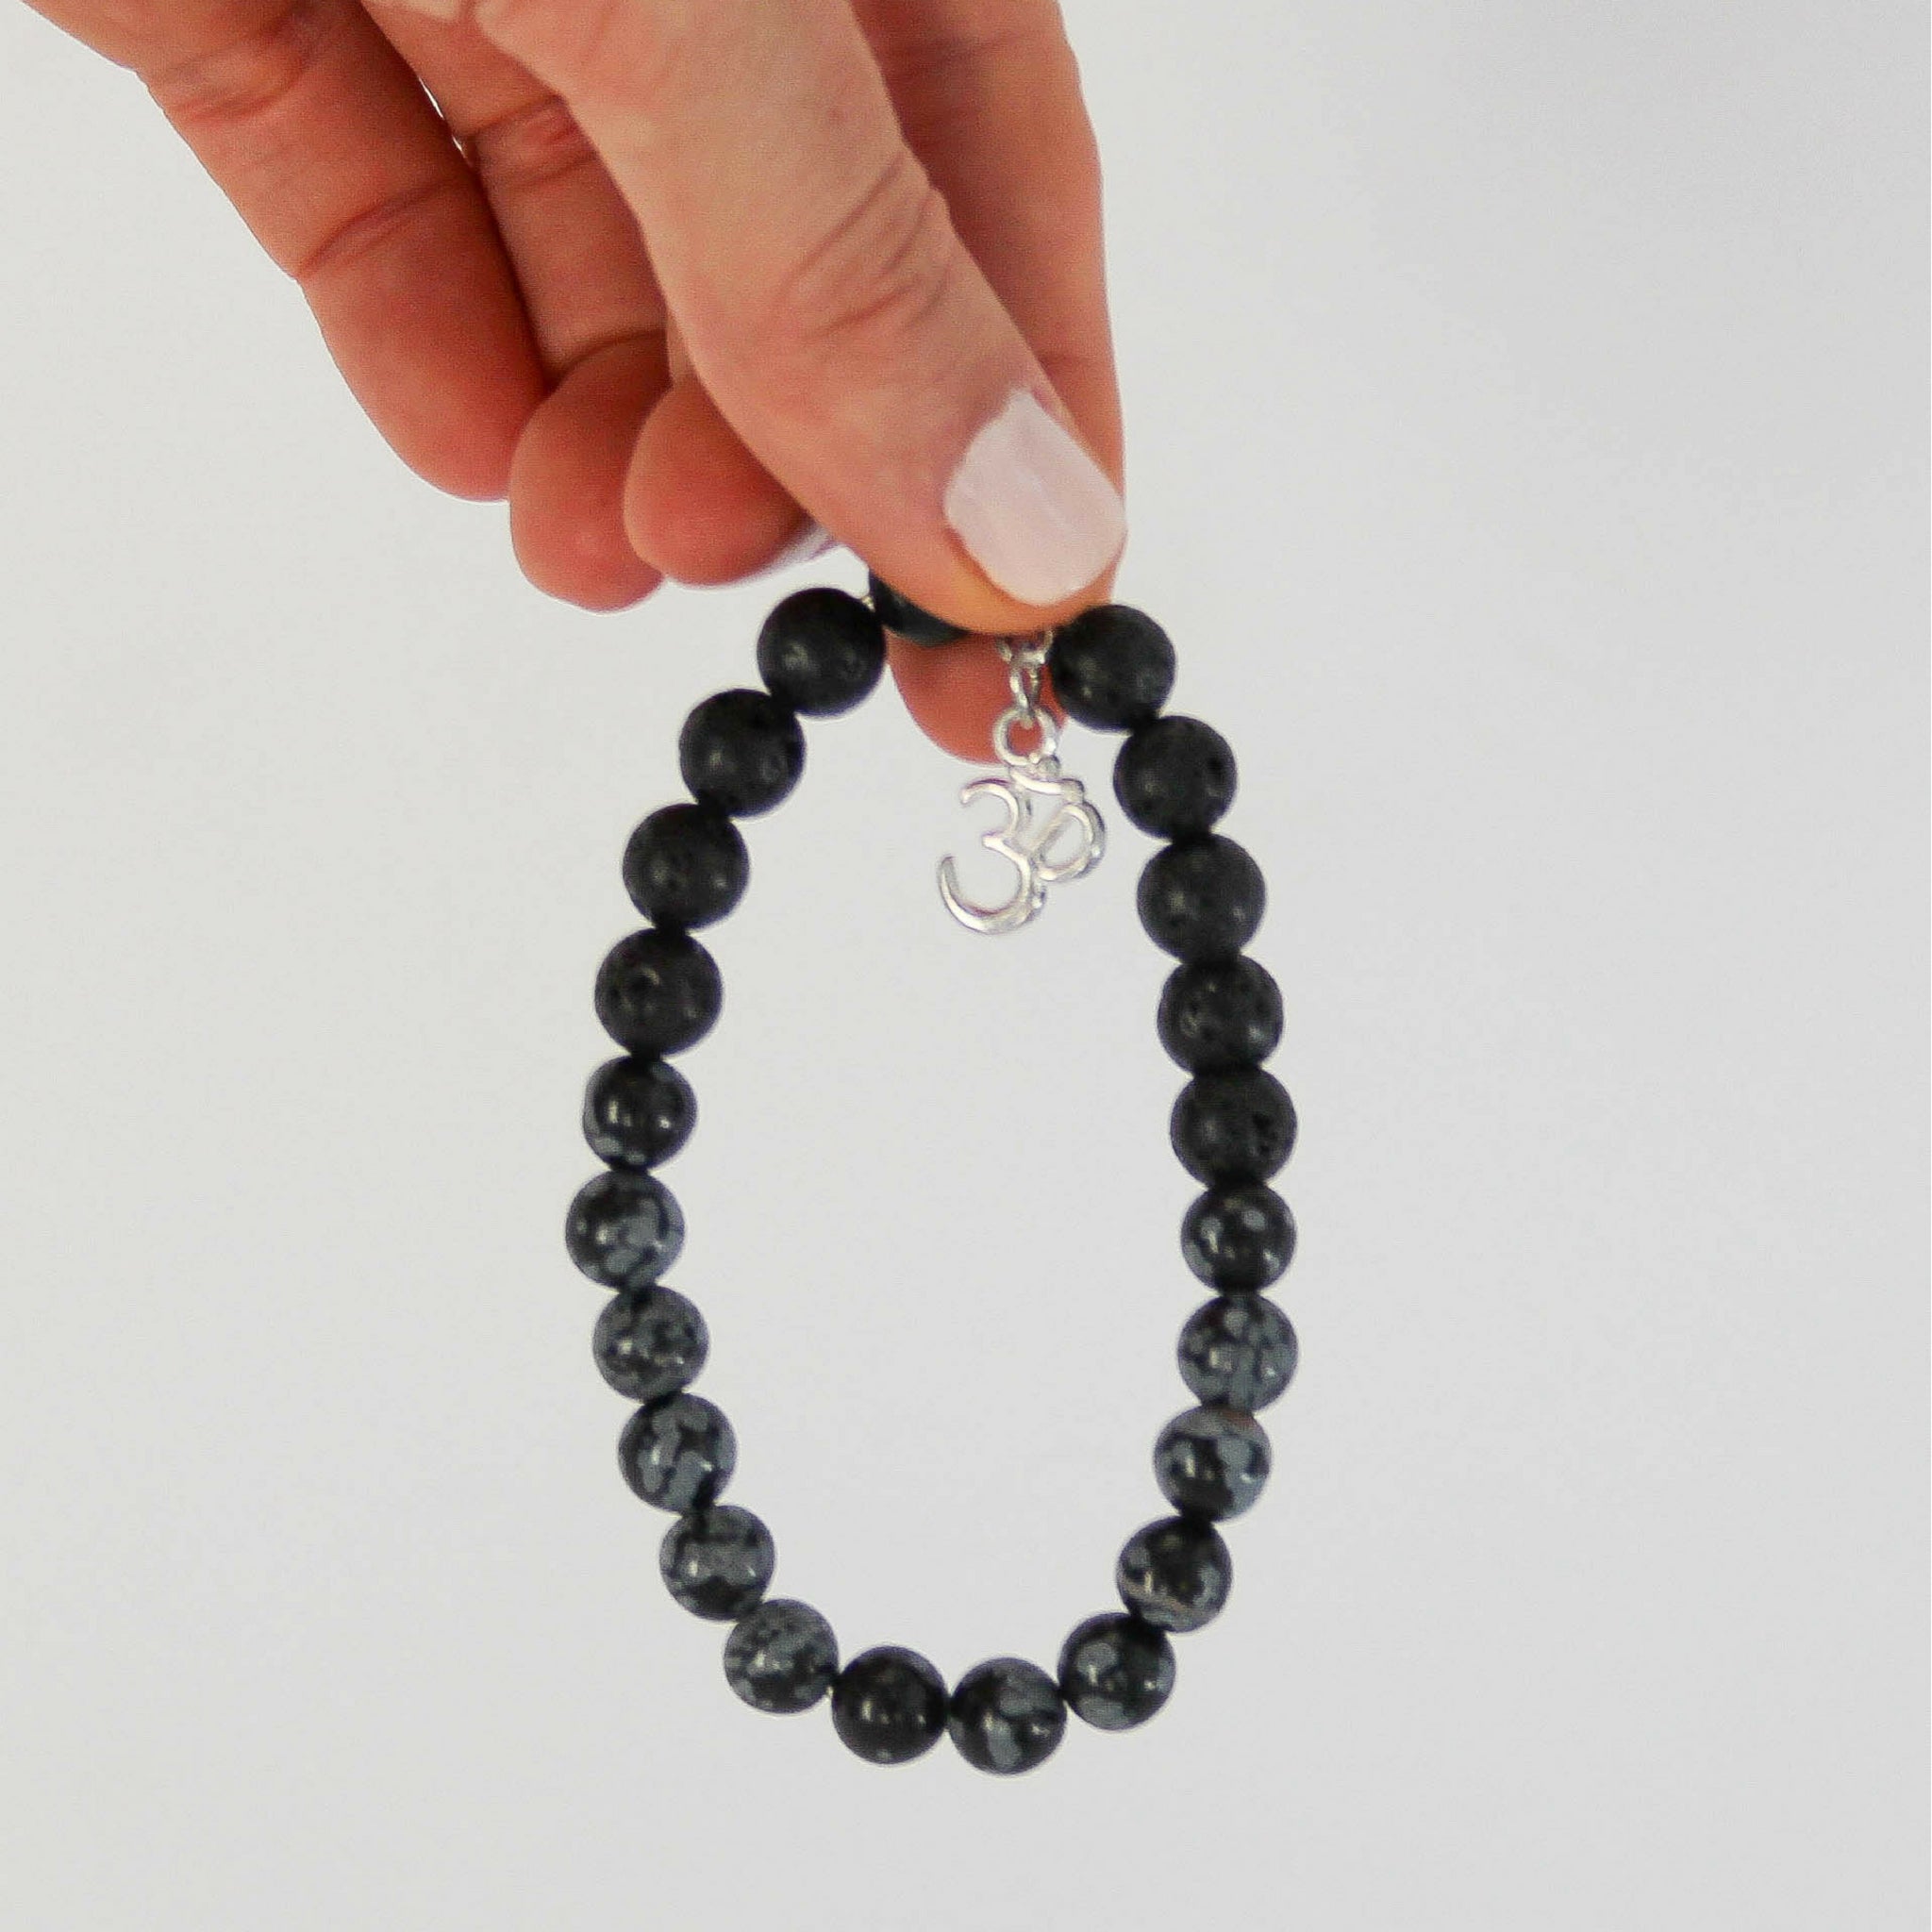 Anxiety Bracelet And Essential Oil Gift Set For Women By Scilla Rose |  notonthehighstreet.com